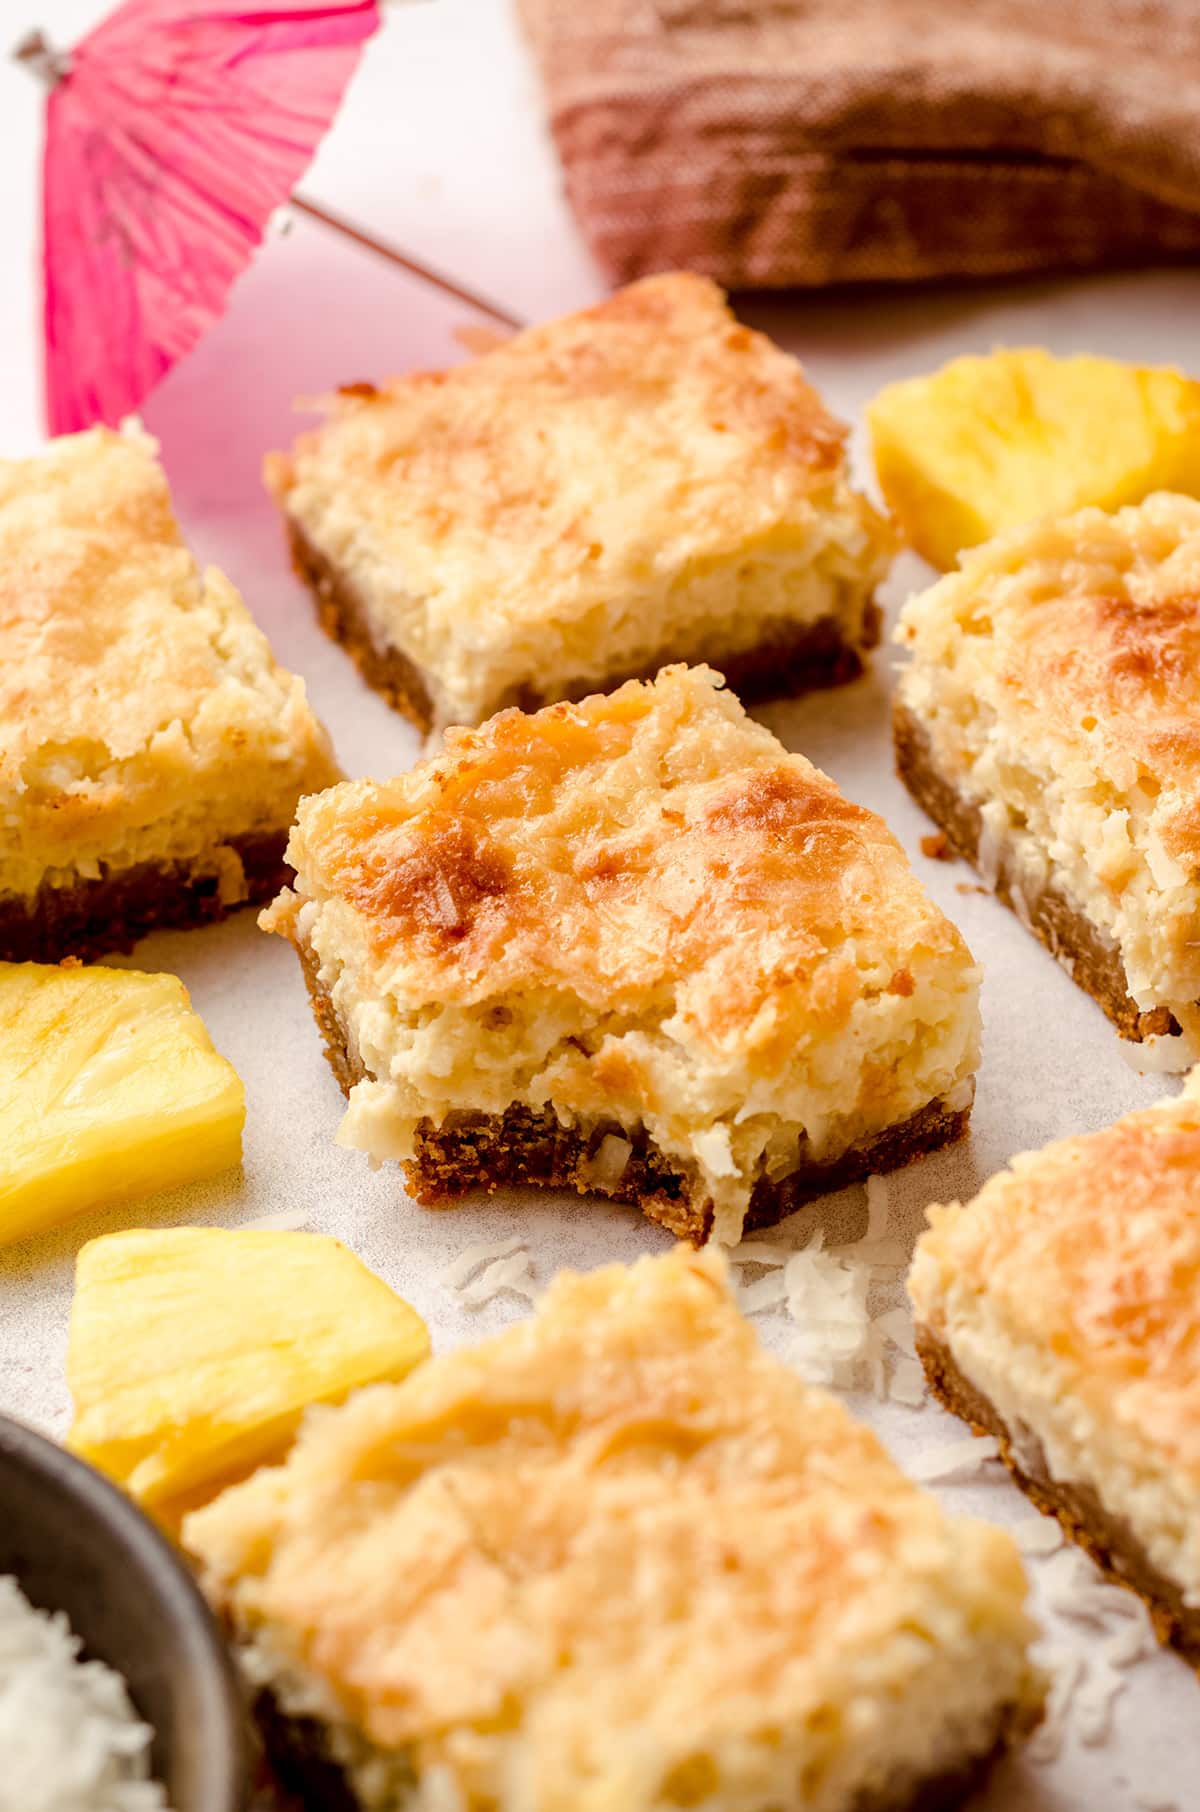 piña colada squares with one that has a bite taken out of it